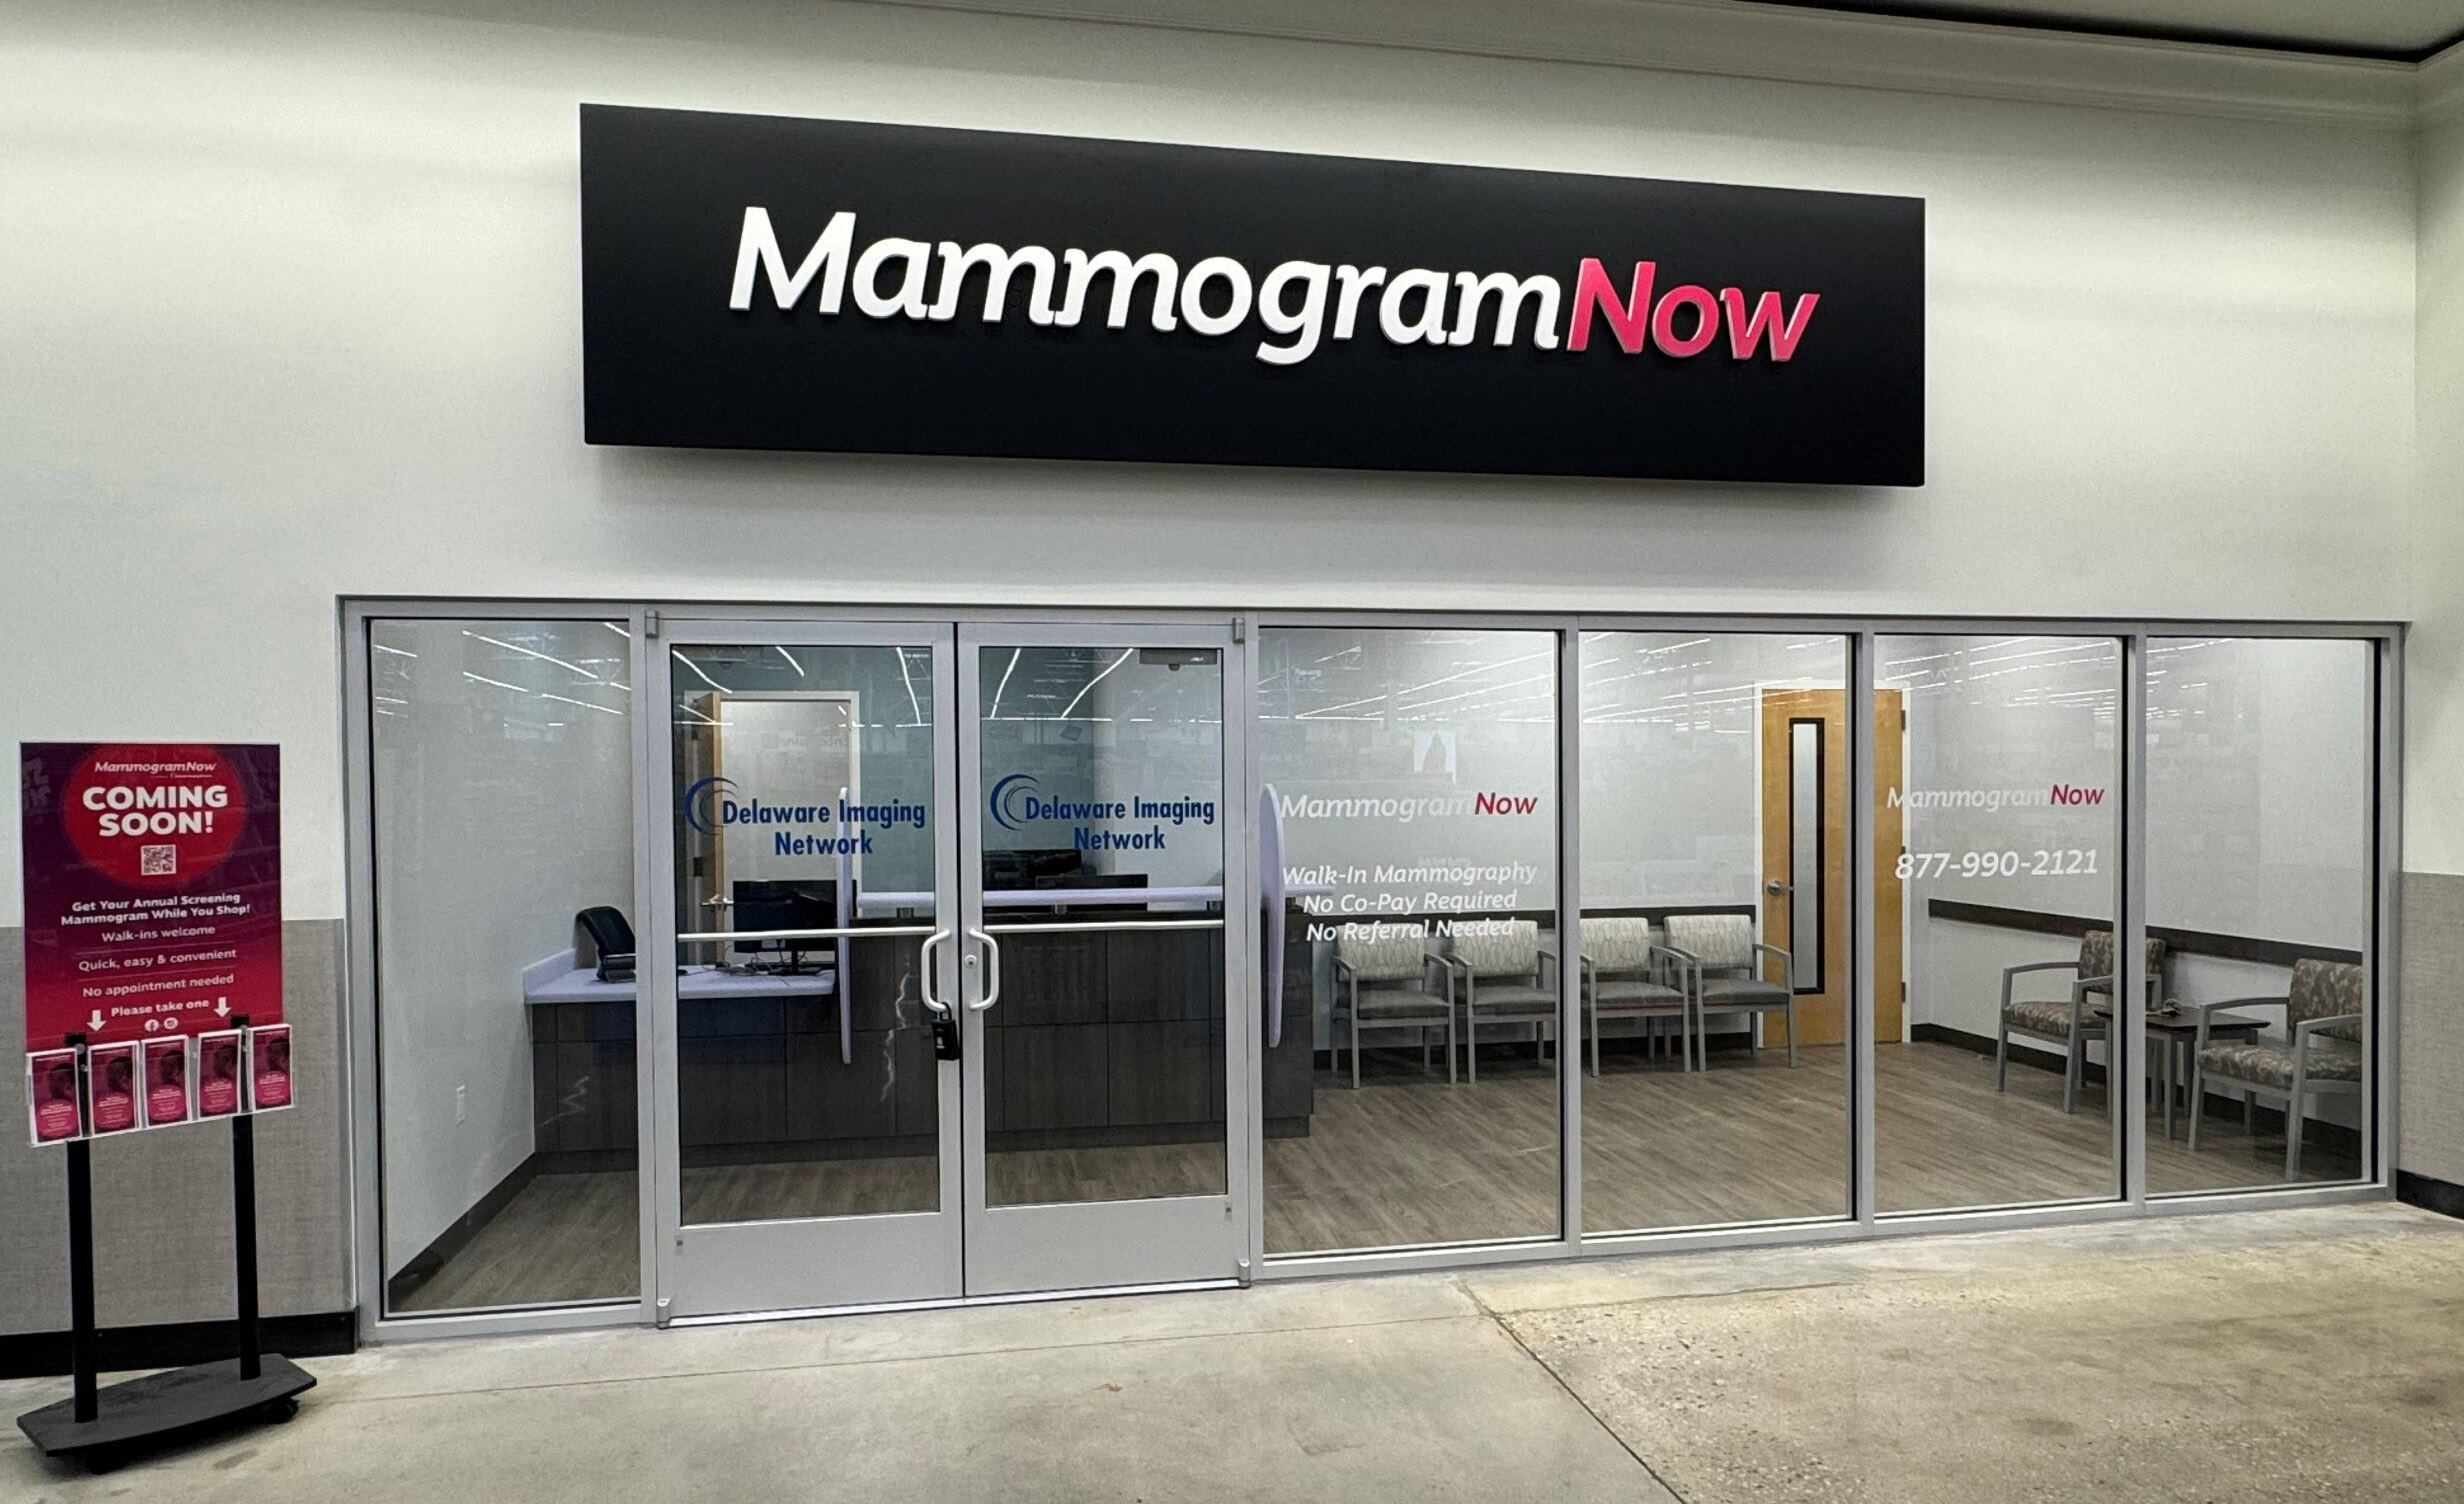 an image of the MammogramNow storefront